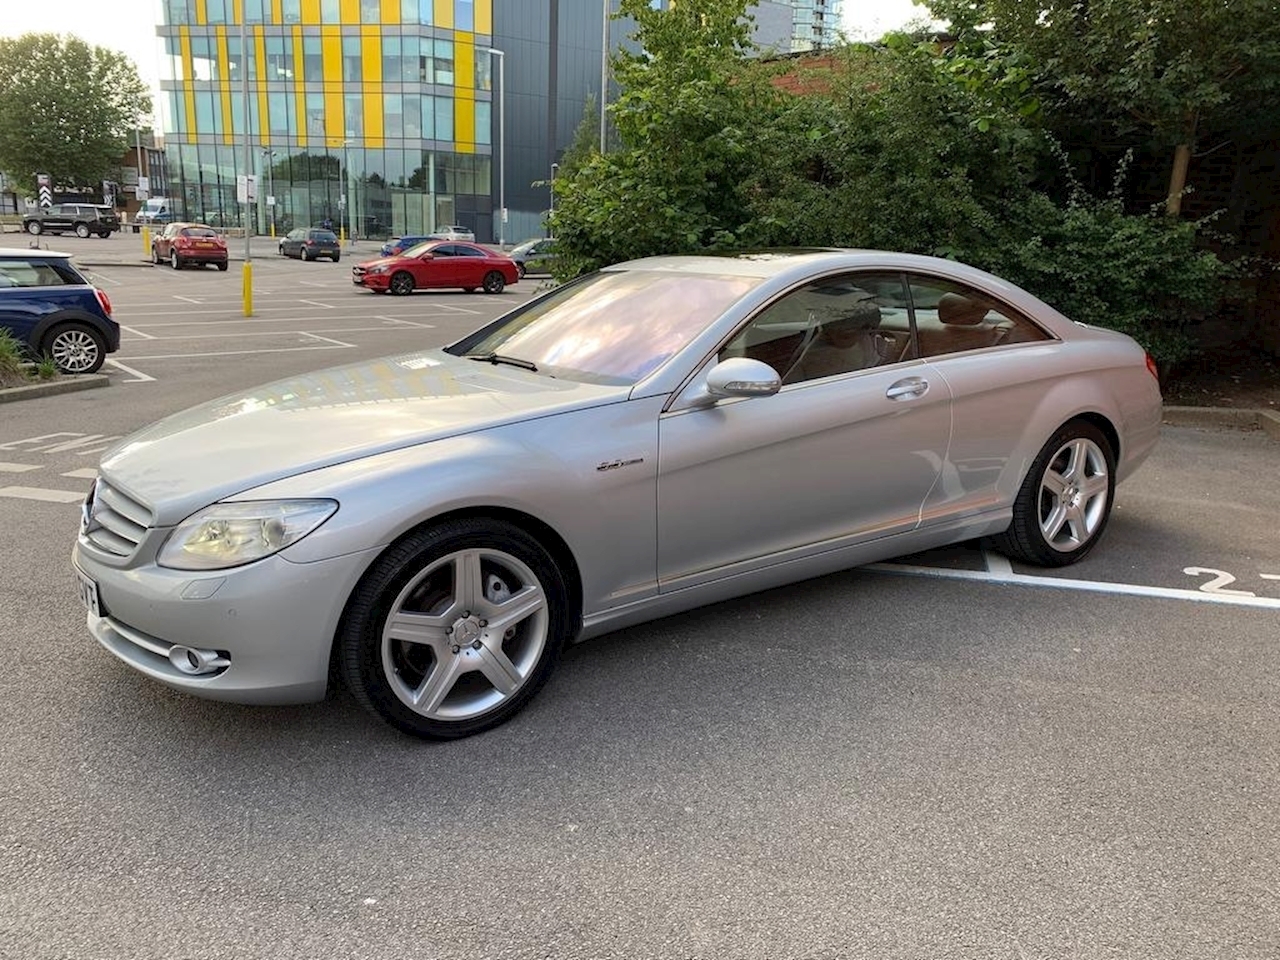 Used 10 Mercedes Cl Cl500 Coupe 5 0 Automatic Petrol For Sale In Manchester Smartfish Group Ltd T A Albion Car Sales